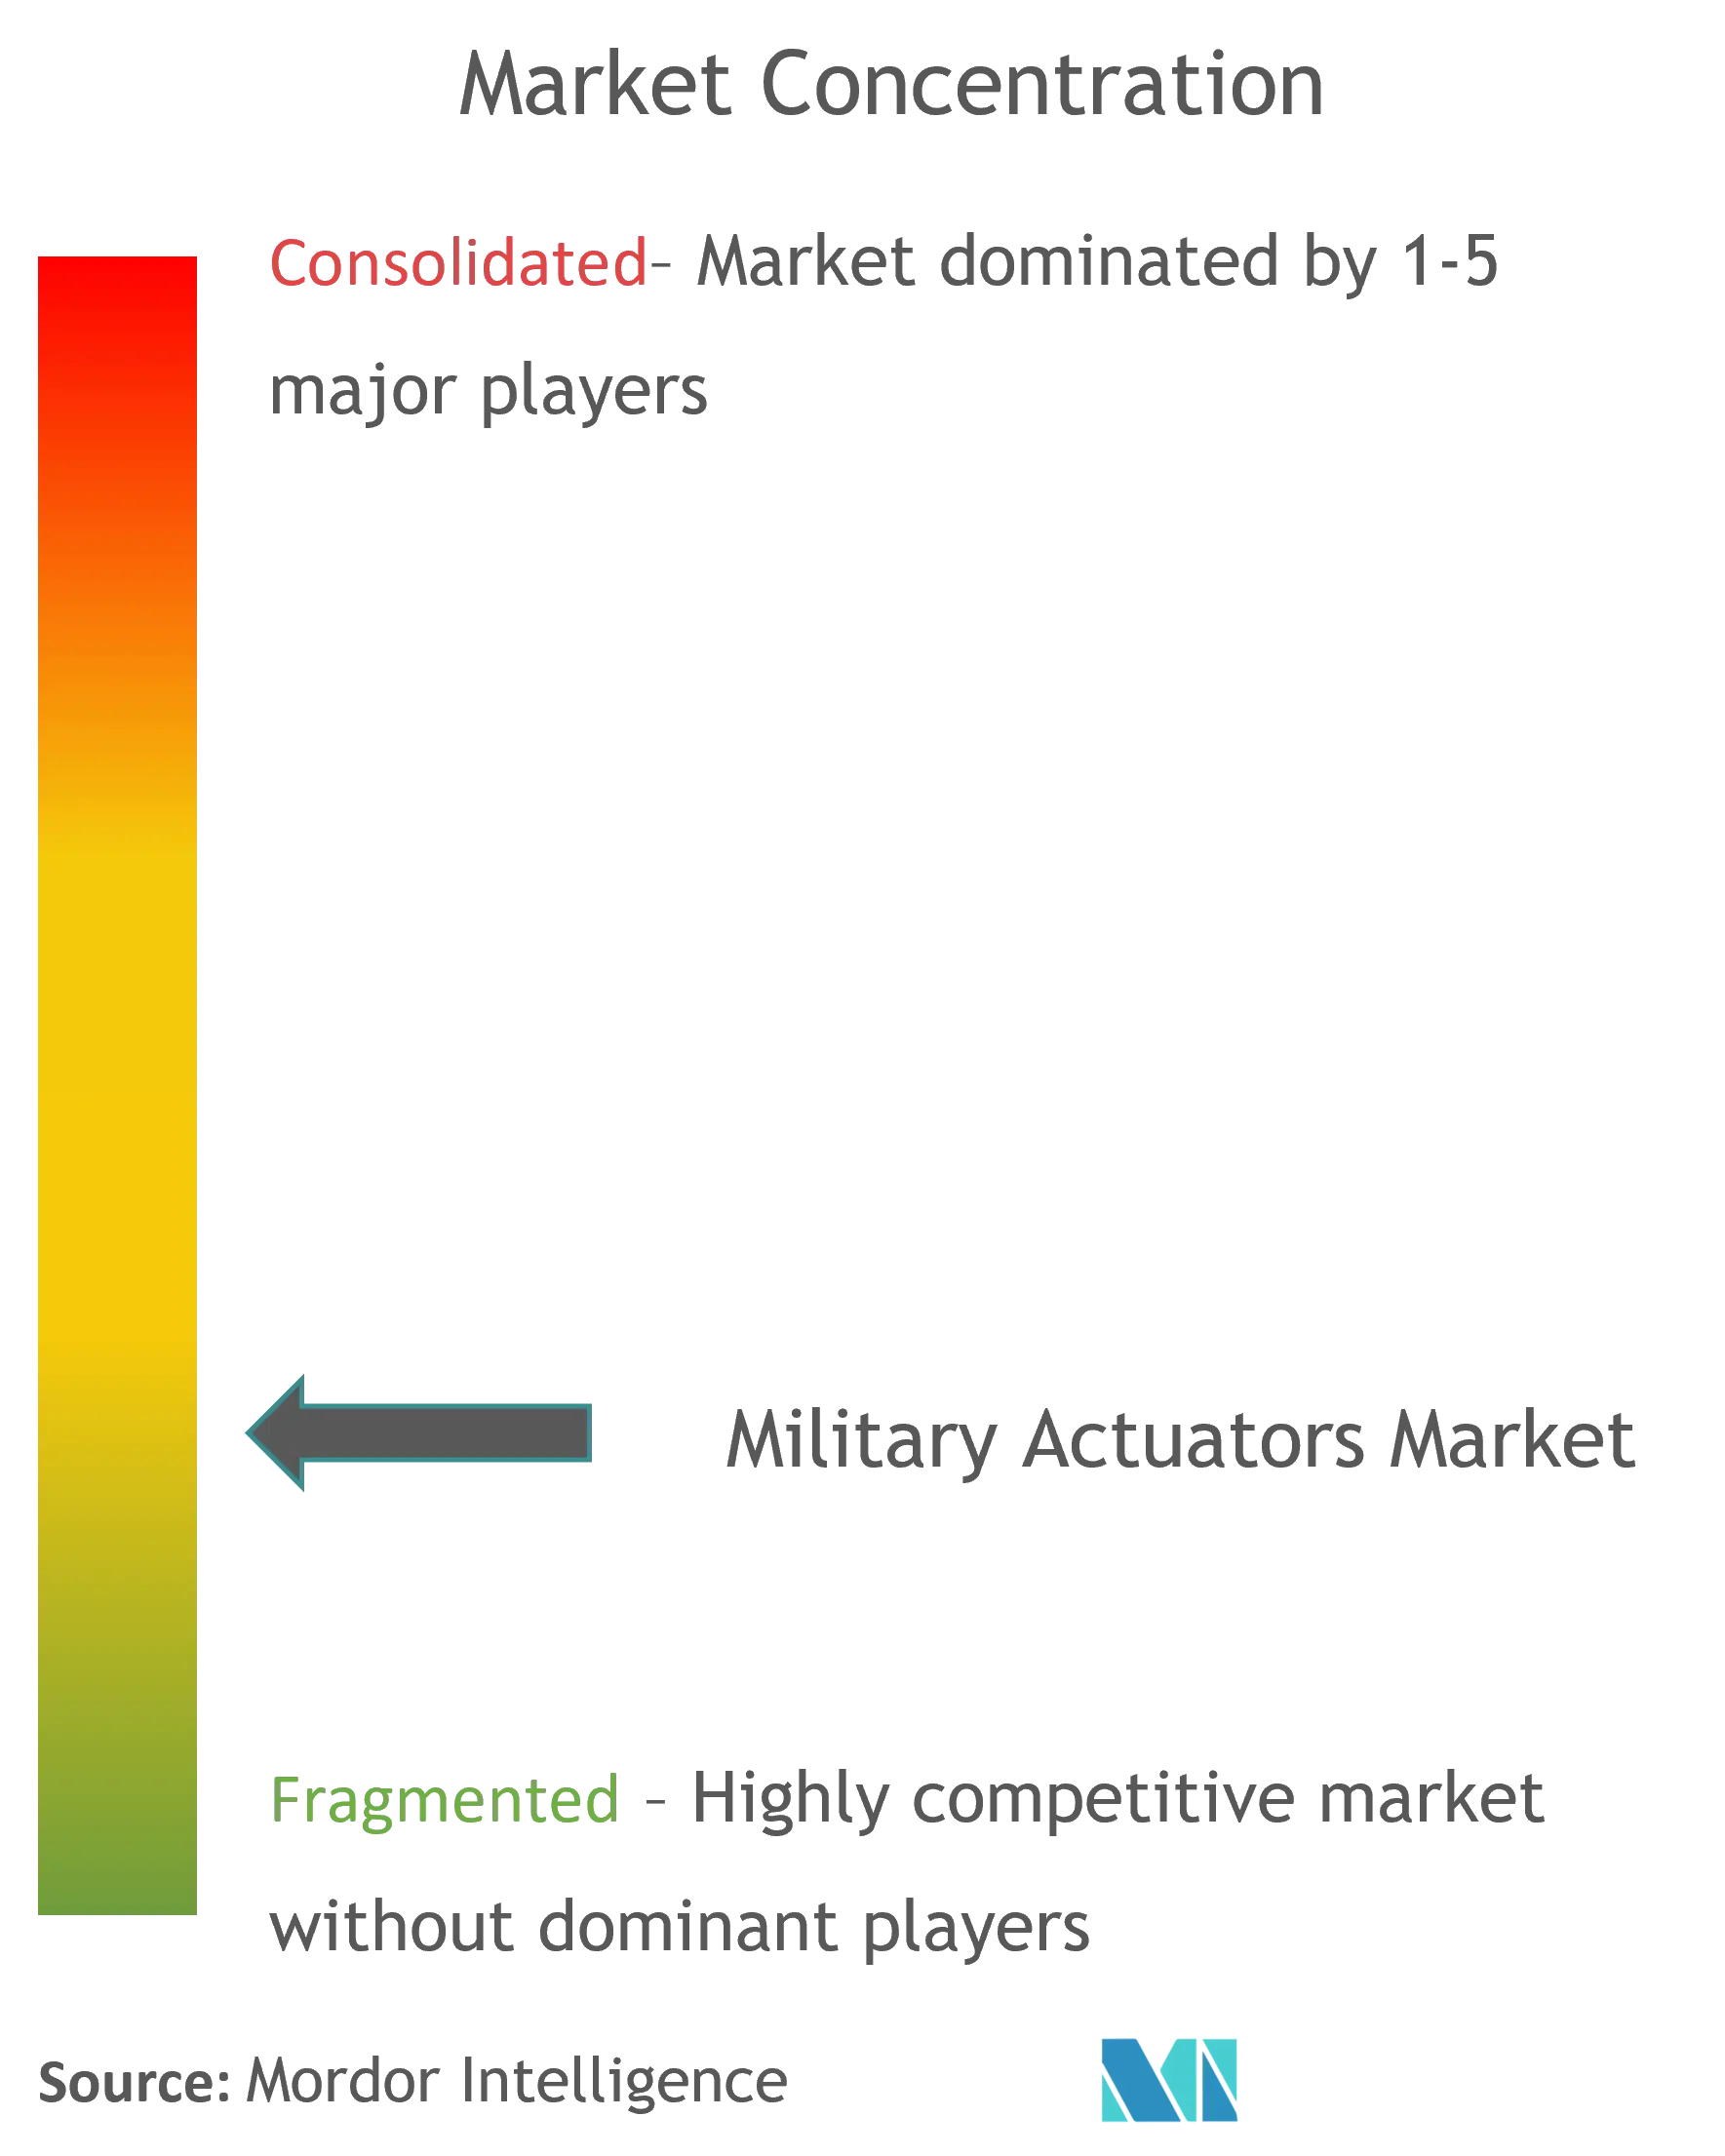 miltiary actuators market updated CL.png